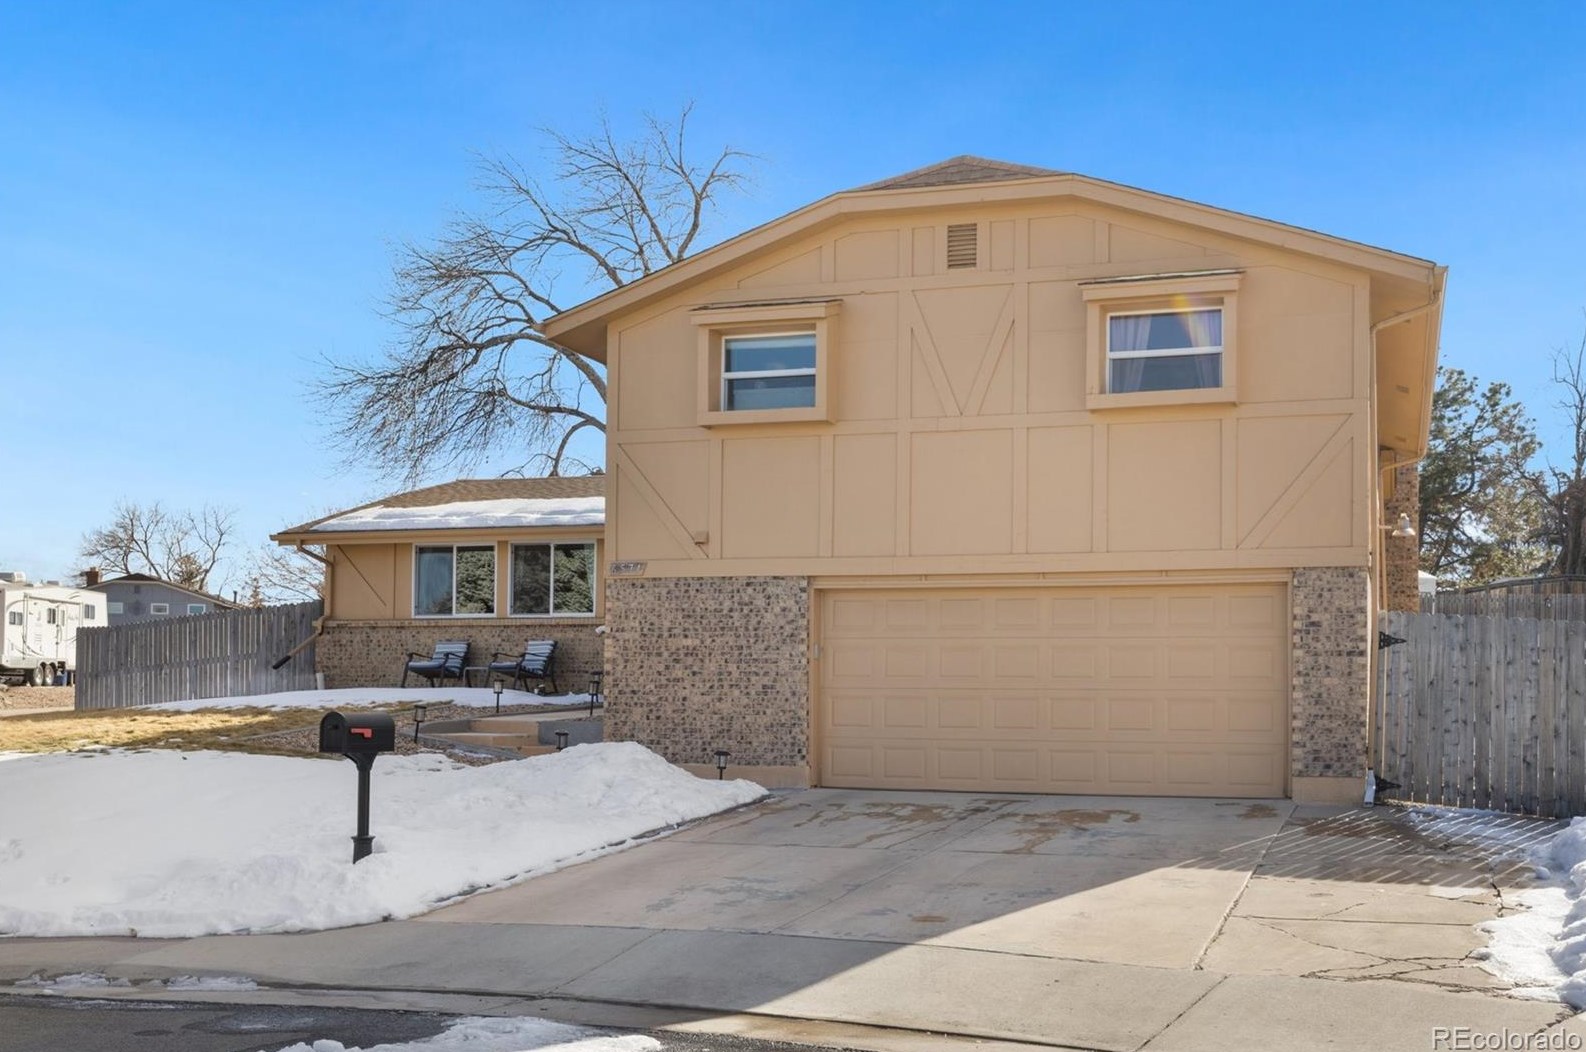 6571 73rd Ave, Arvada, CO 80003